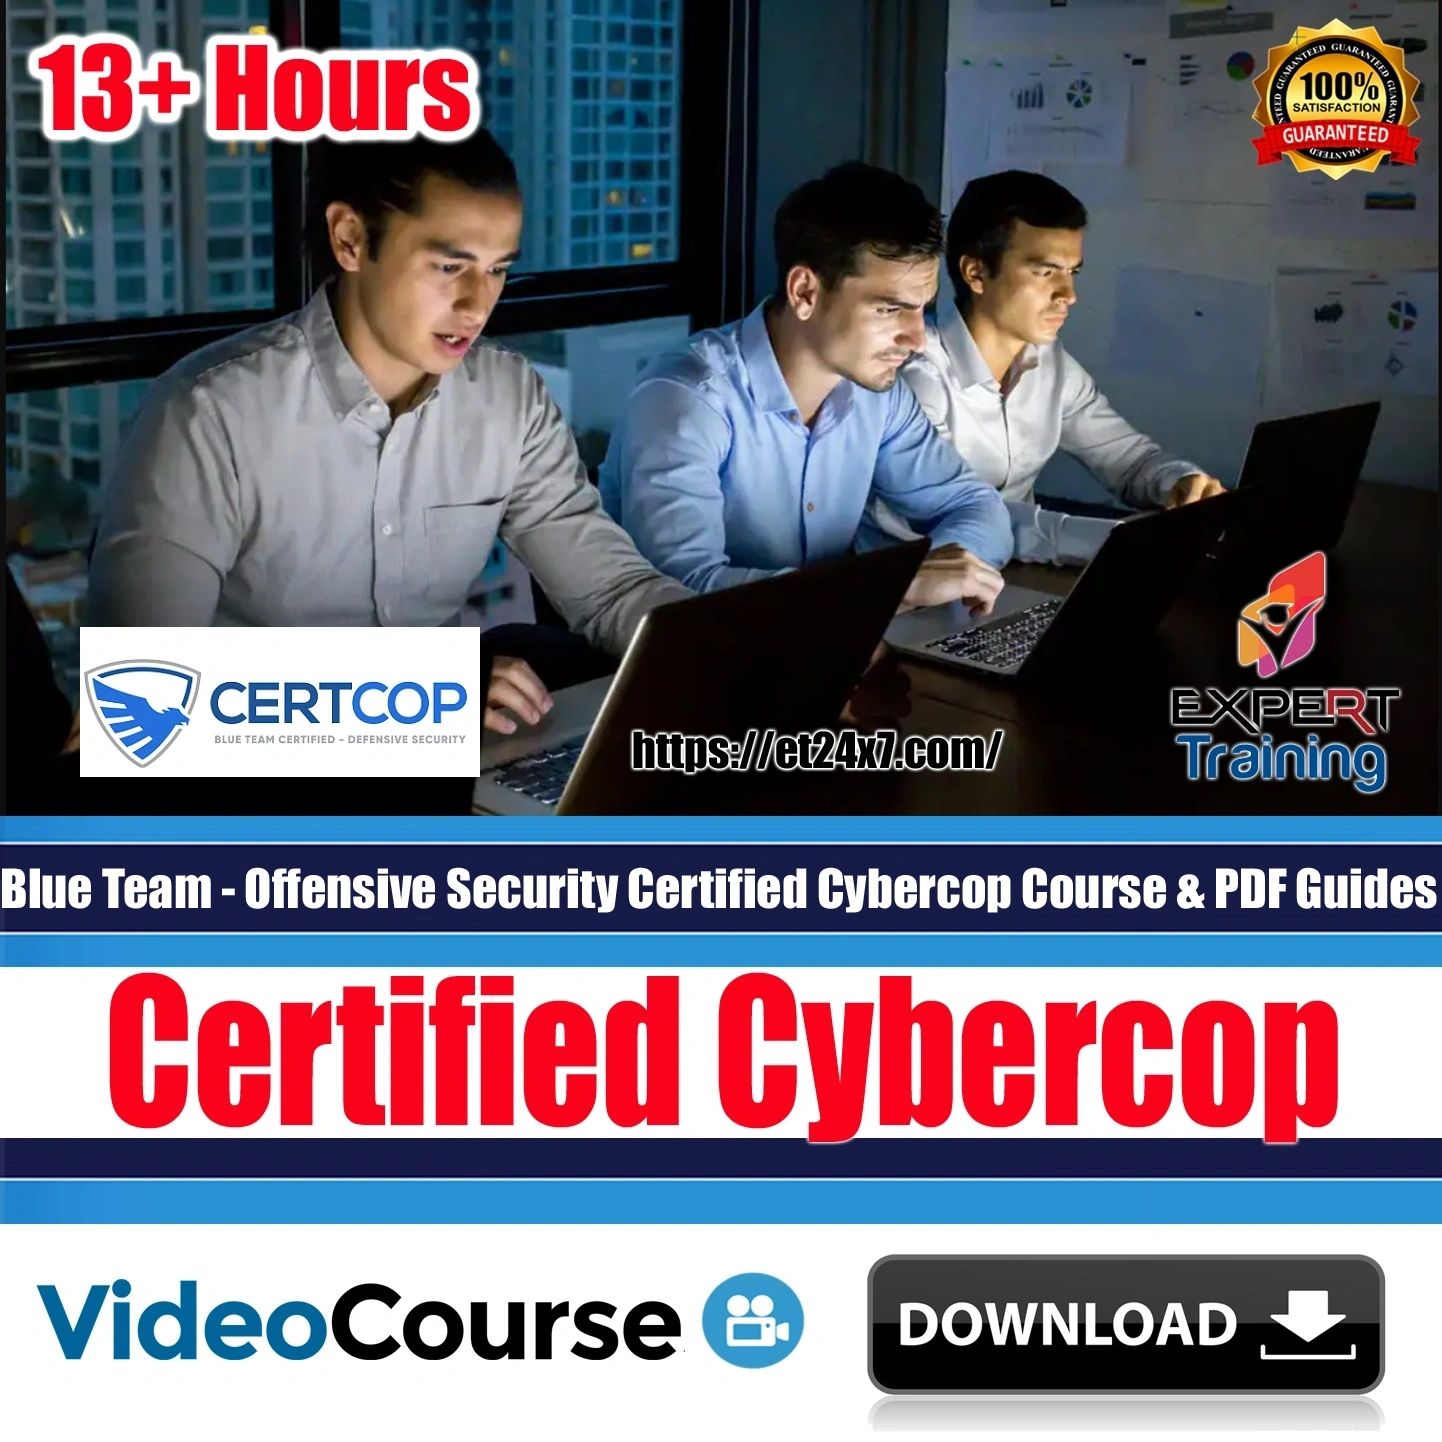 Blue Team – Offensive Security Certified Cybercop Course & PDF Guides